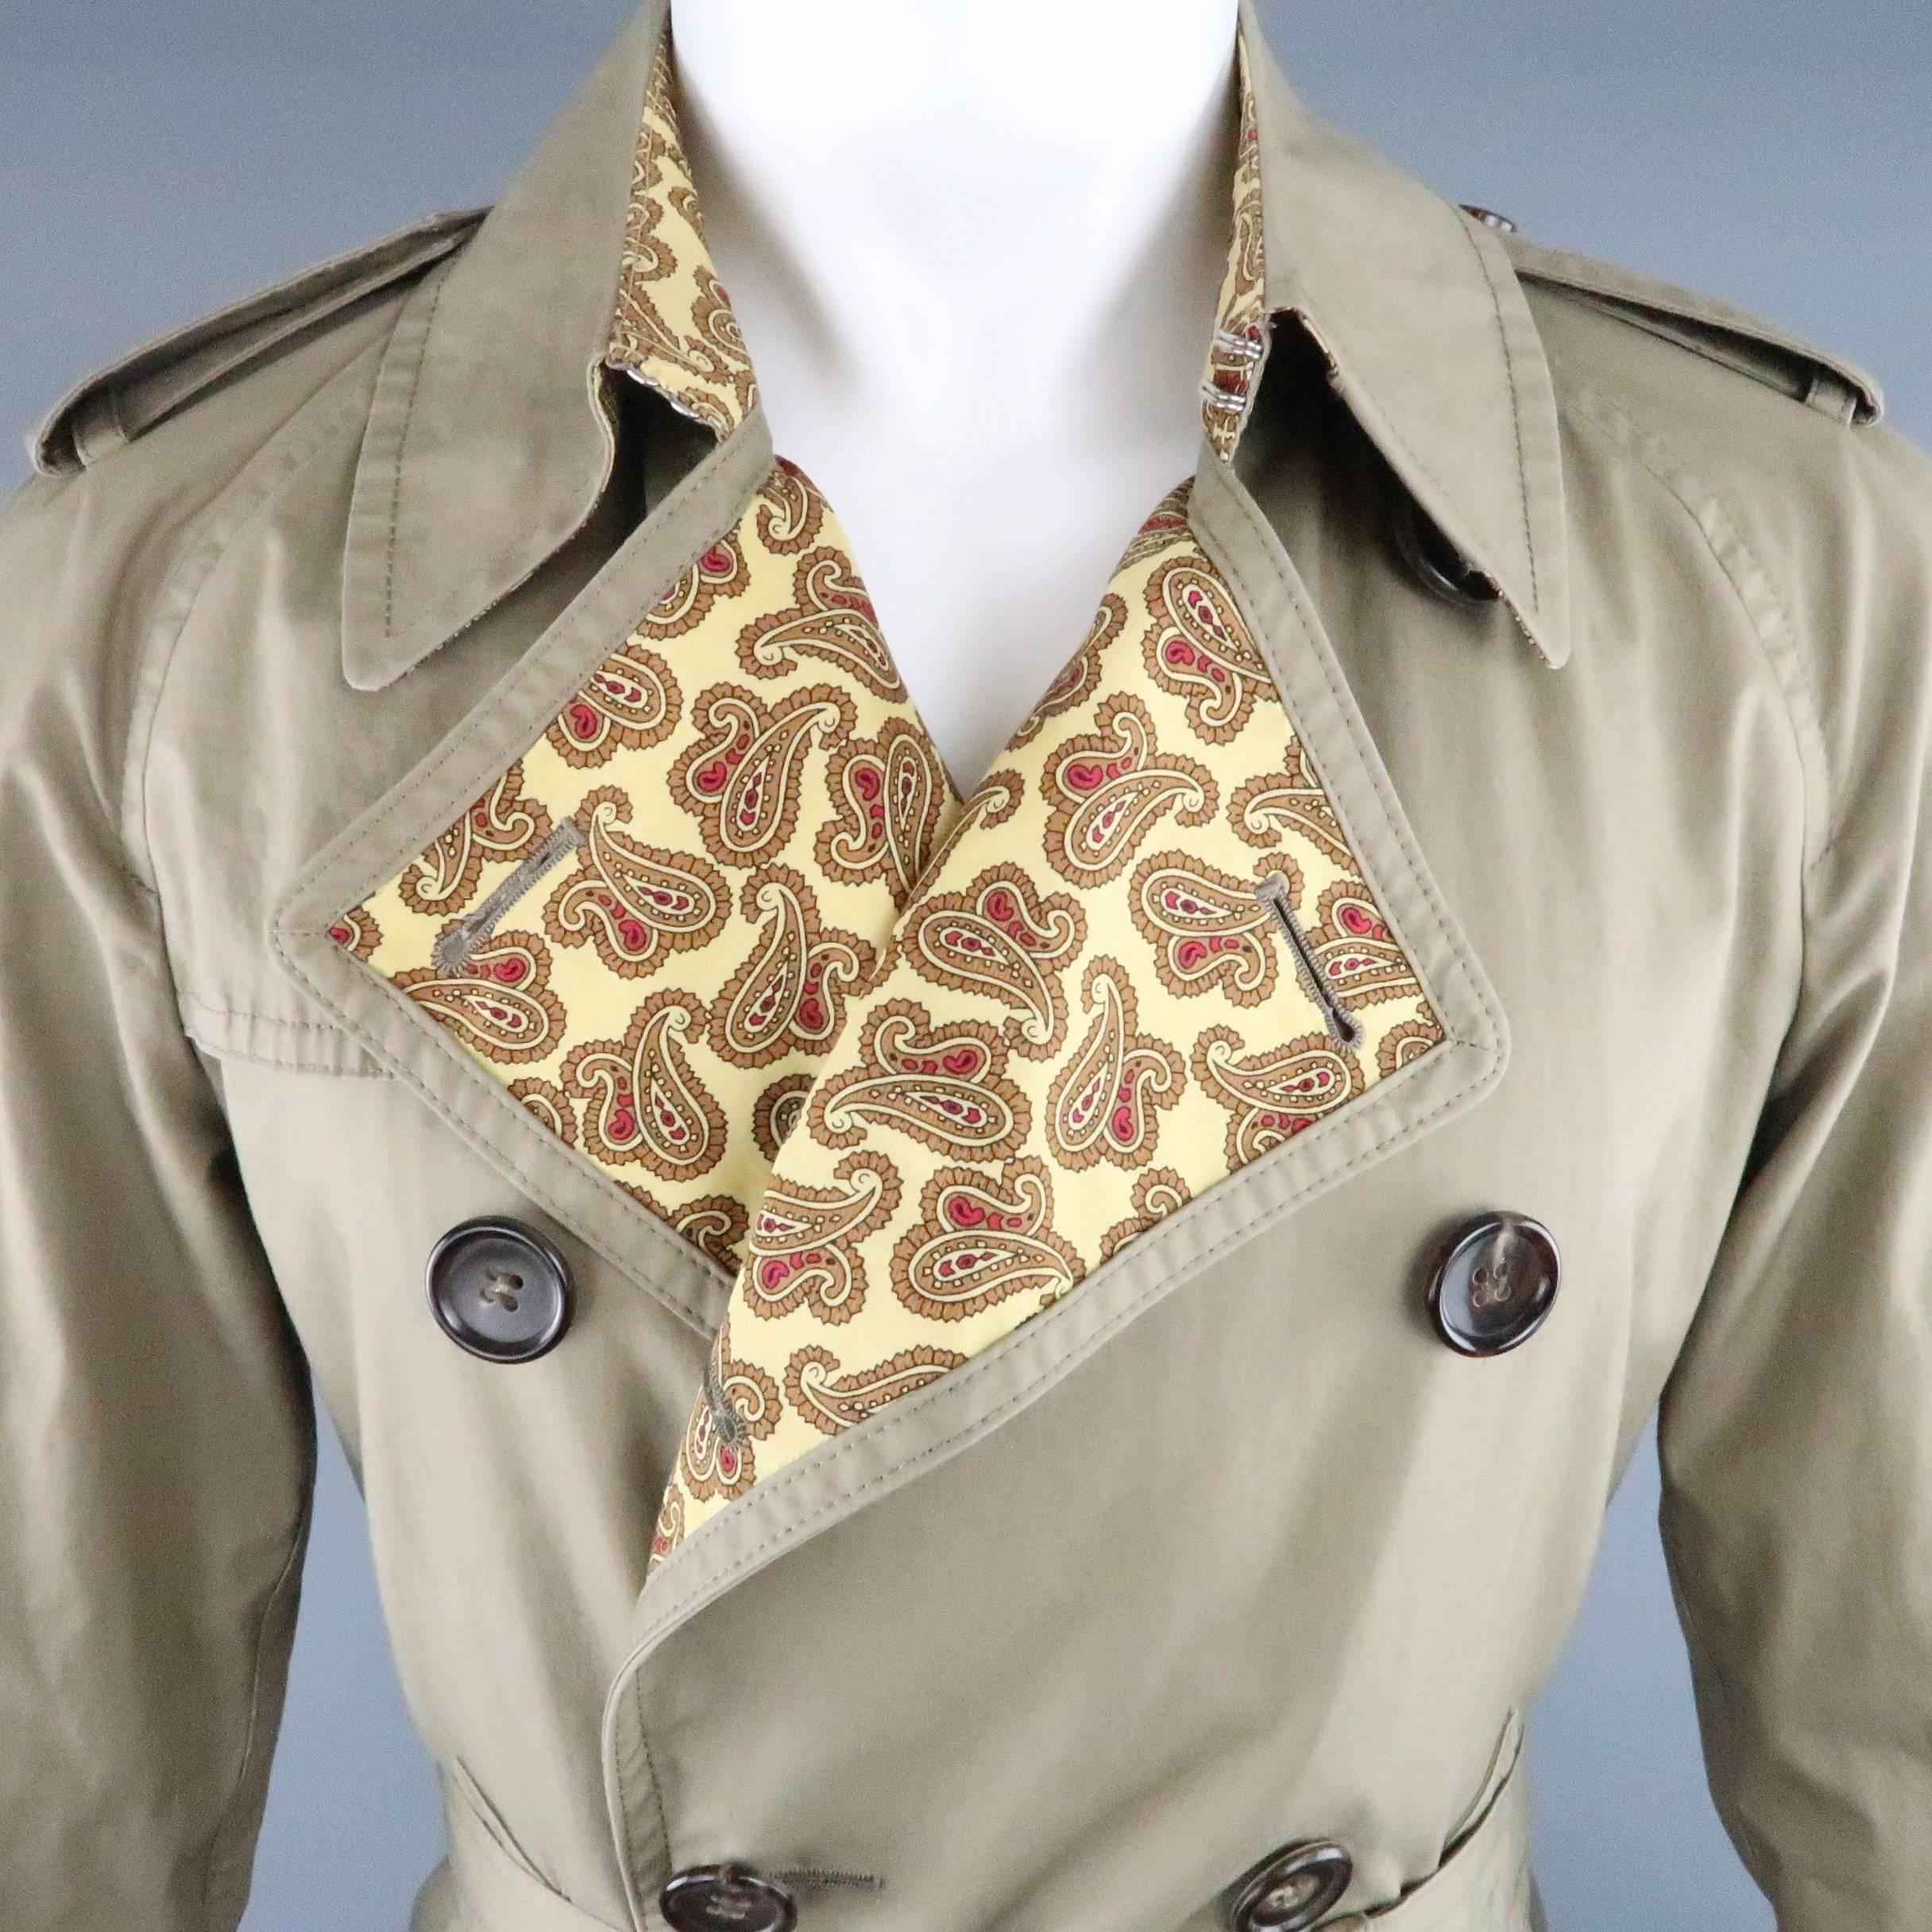 JUNYA WATANABE MAN trench coat comes in dark khaki cotton with raglan sleeves, storm flap, hook eye collar, belted waist and cuffs, epaulets, and yellow and red paisley print lining. Made in Japan.
 
Good Pre-Owned Condition.
Marked: S  AD 2008
